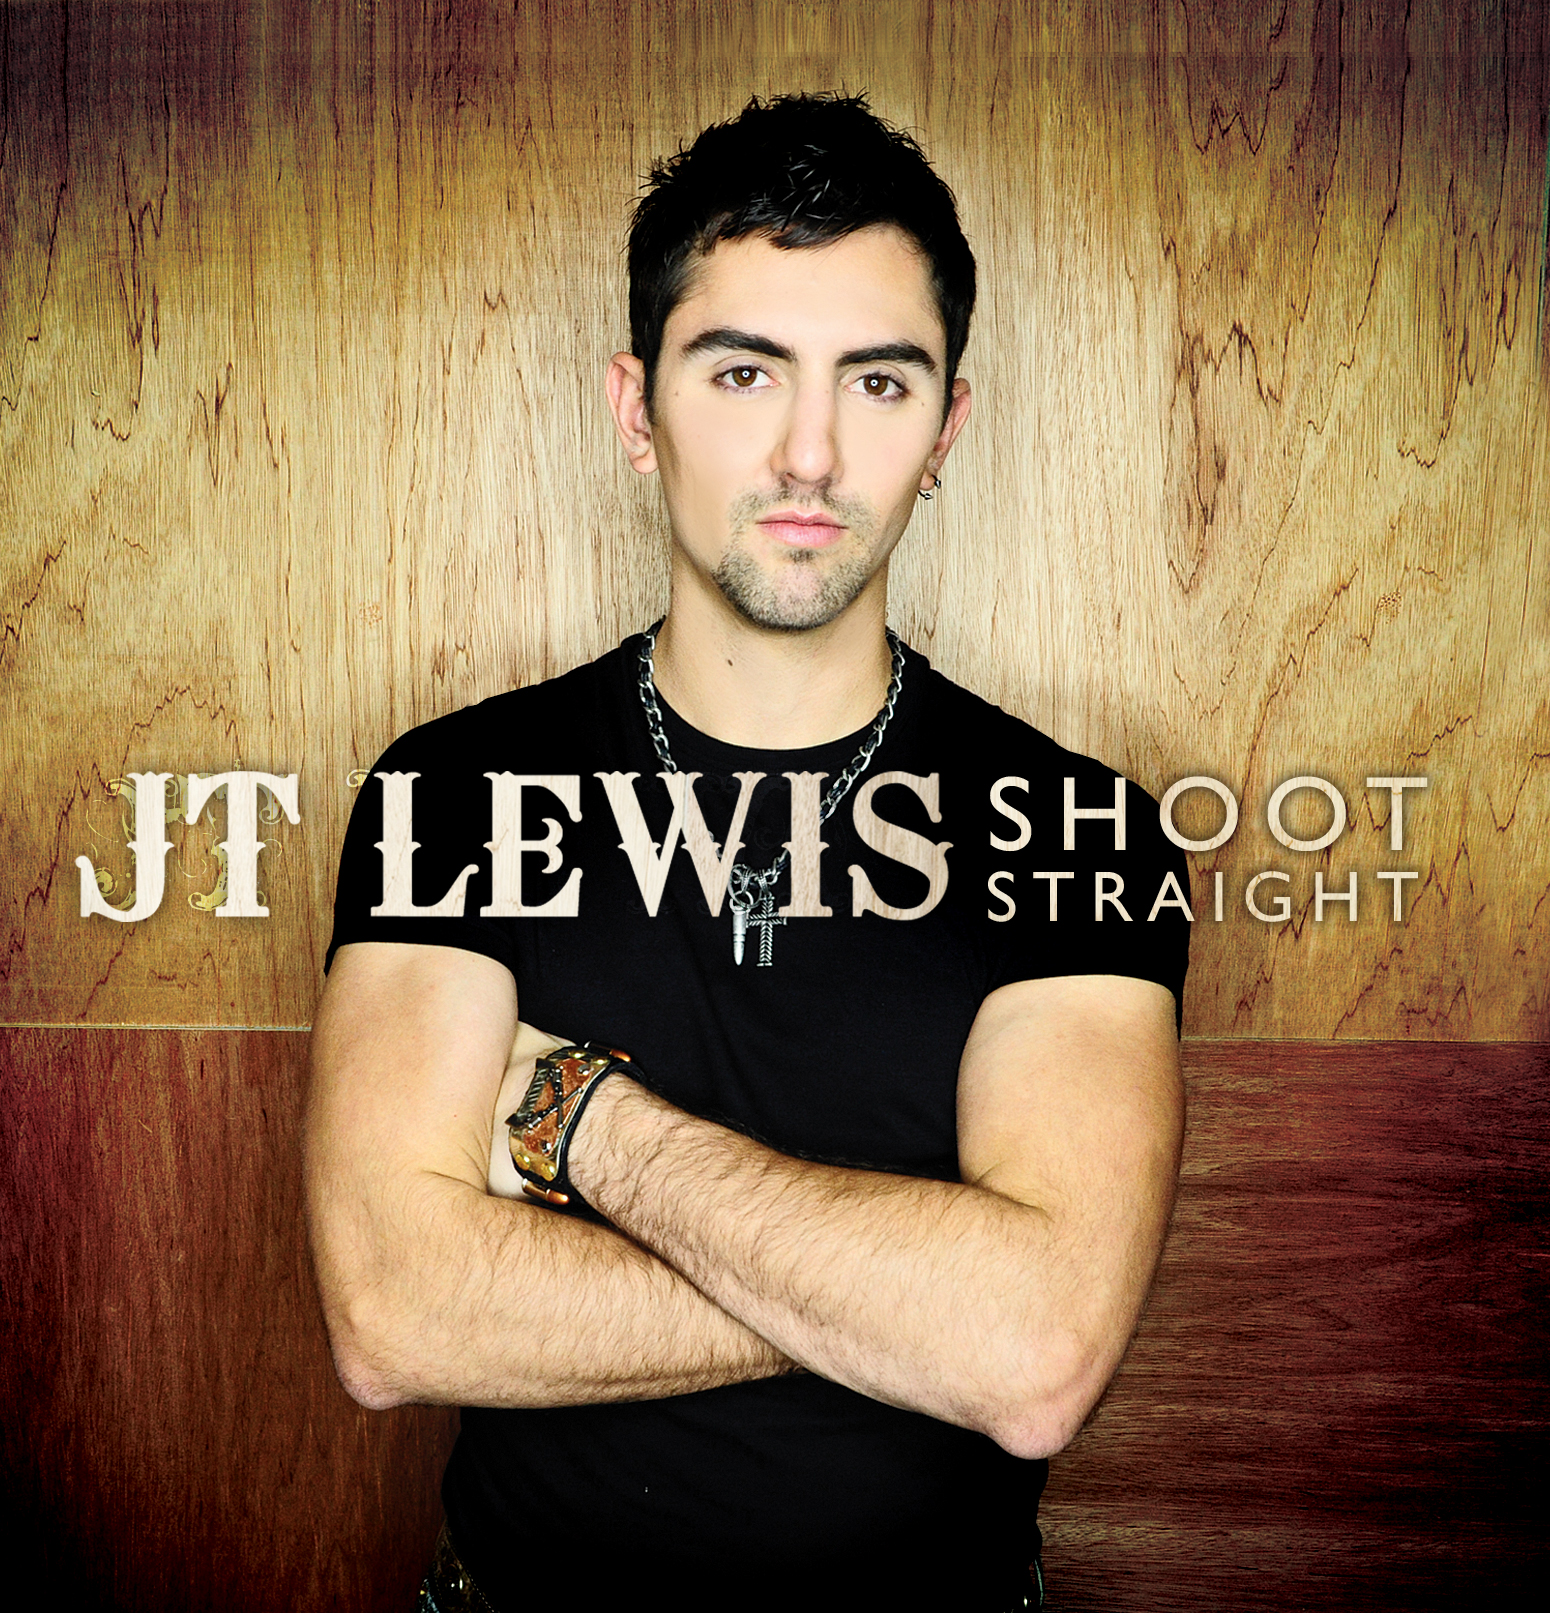 JT Lewis Shoot Straight EP